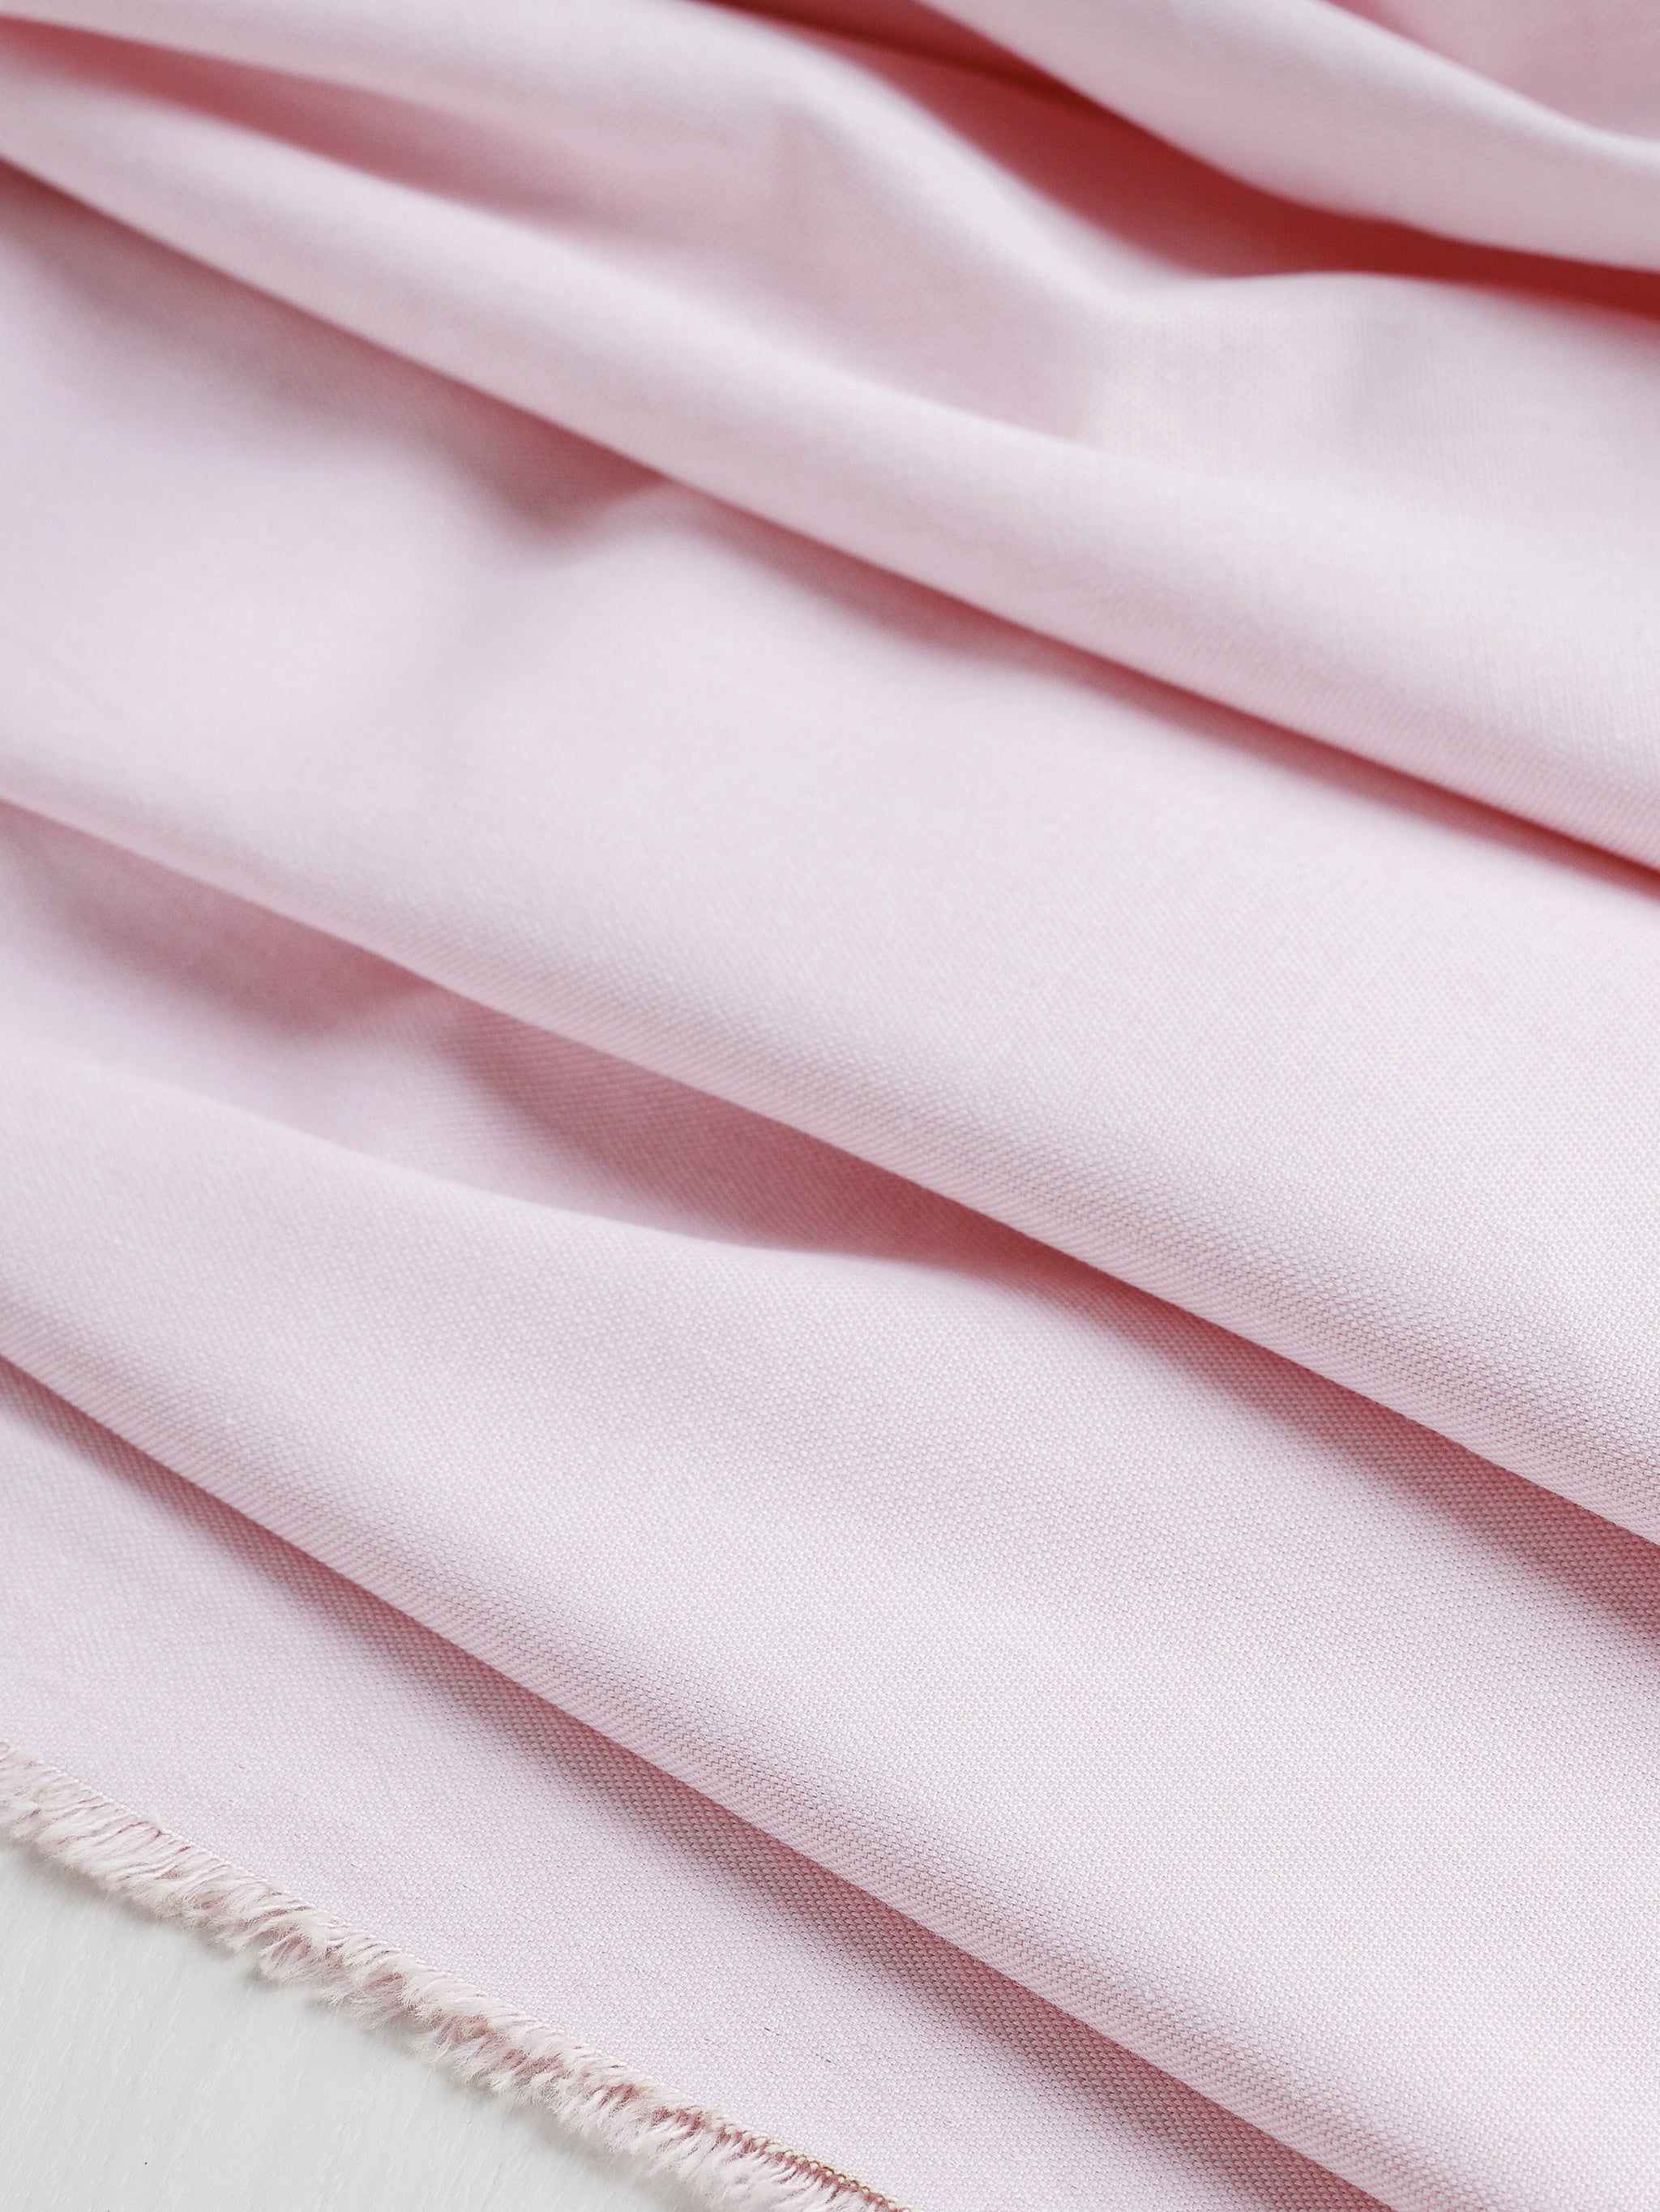 FREE SHIPPING!!! SAMPLE SWATCH Lilac Pale Rayon Jersey Stretch Knit Fabric  - Medium Weight/ 180 GSM, DIY Projects 